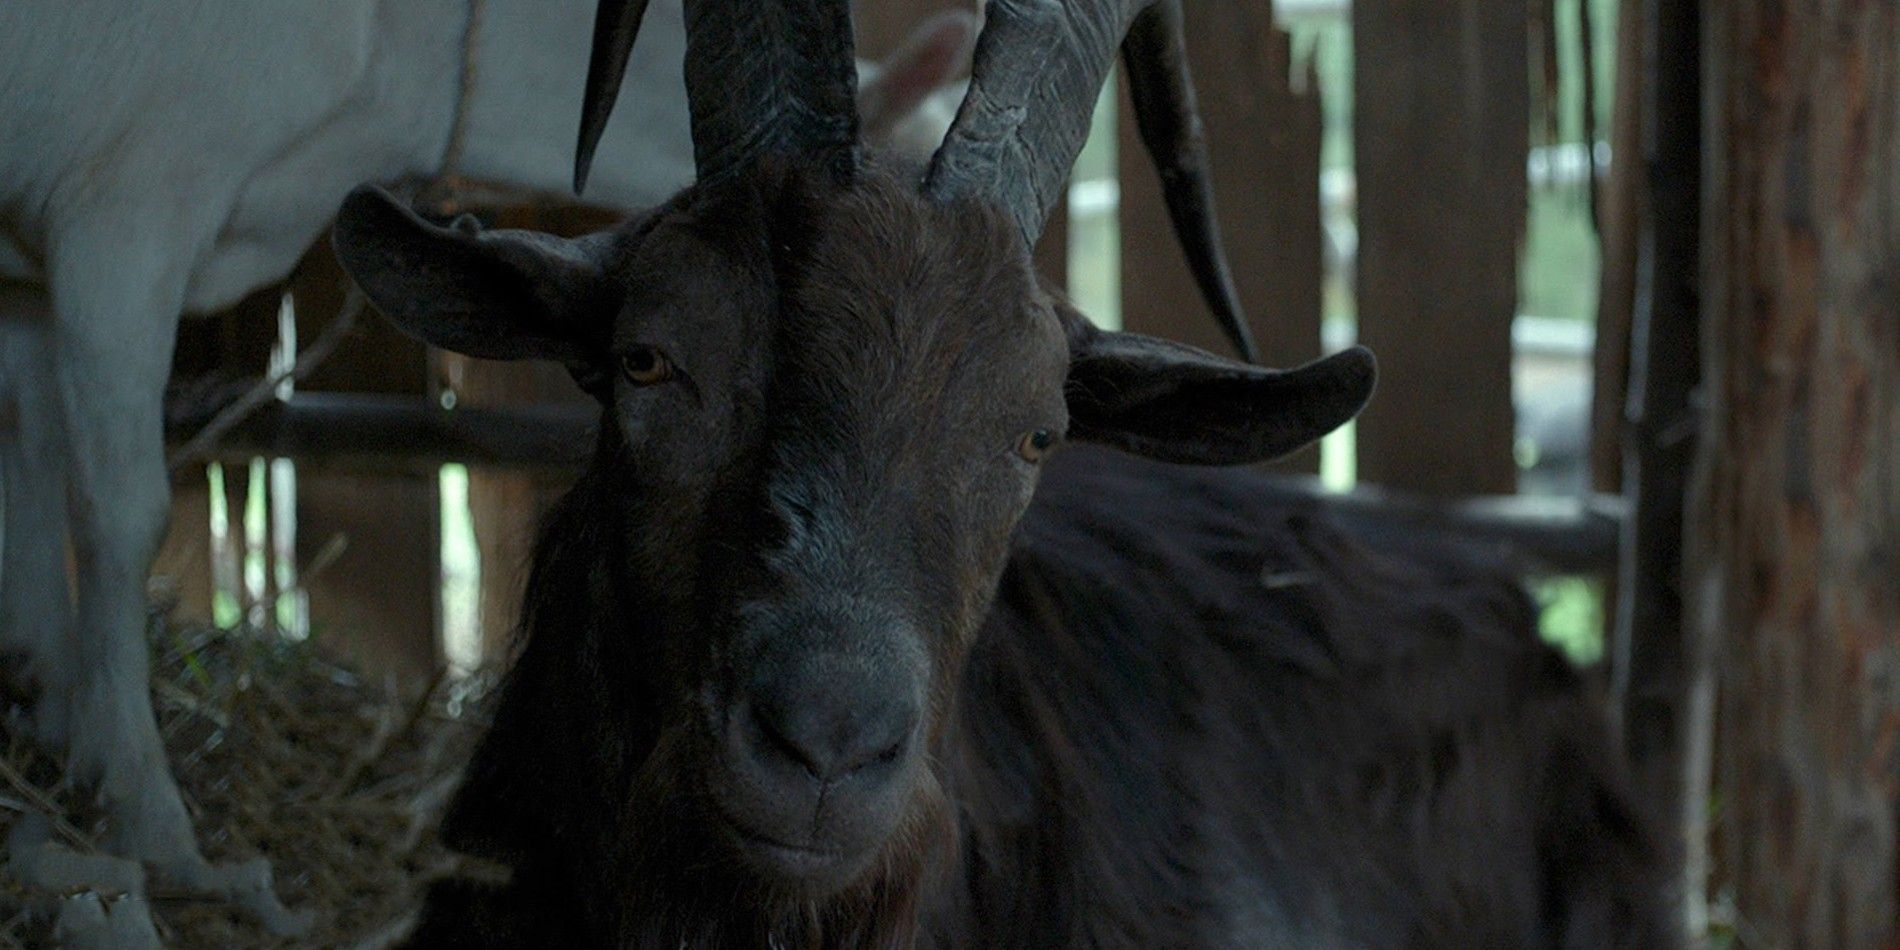 The Witch’s “Wouldst Thou Like To Live Deliciously” Quote Explained